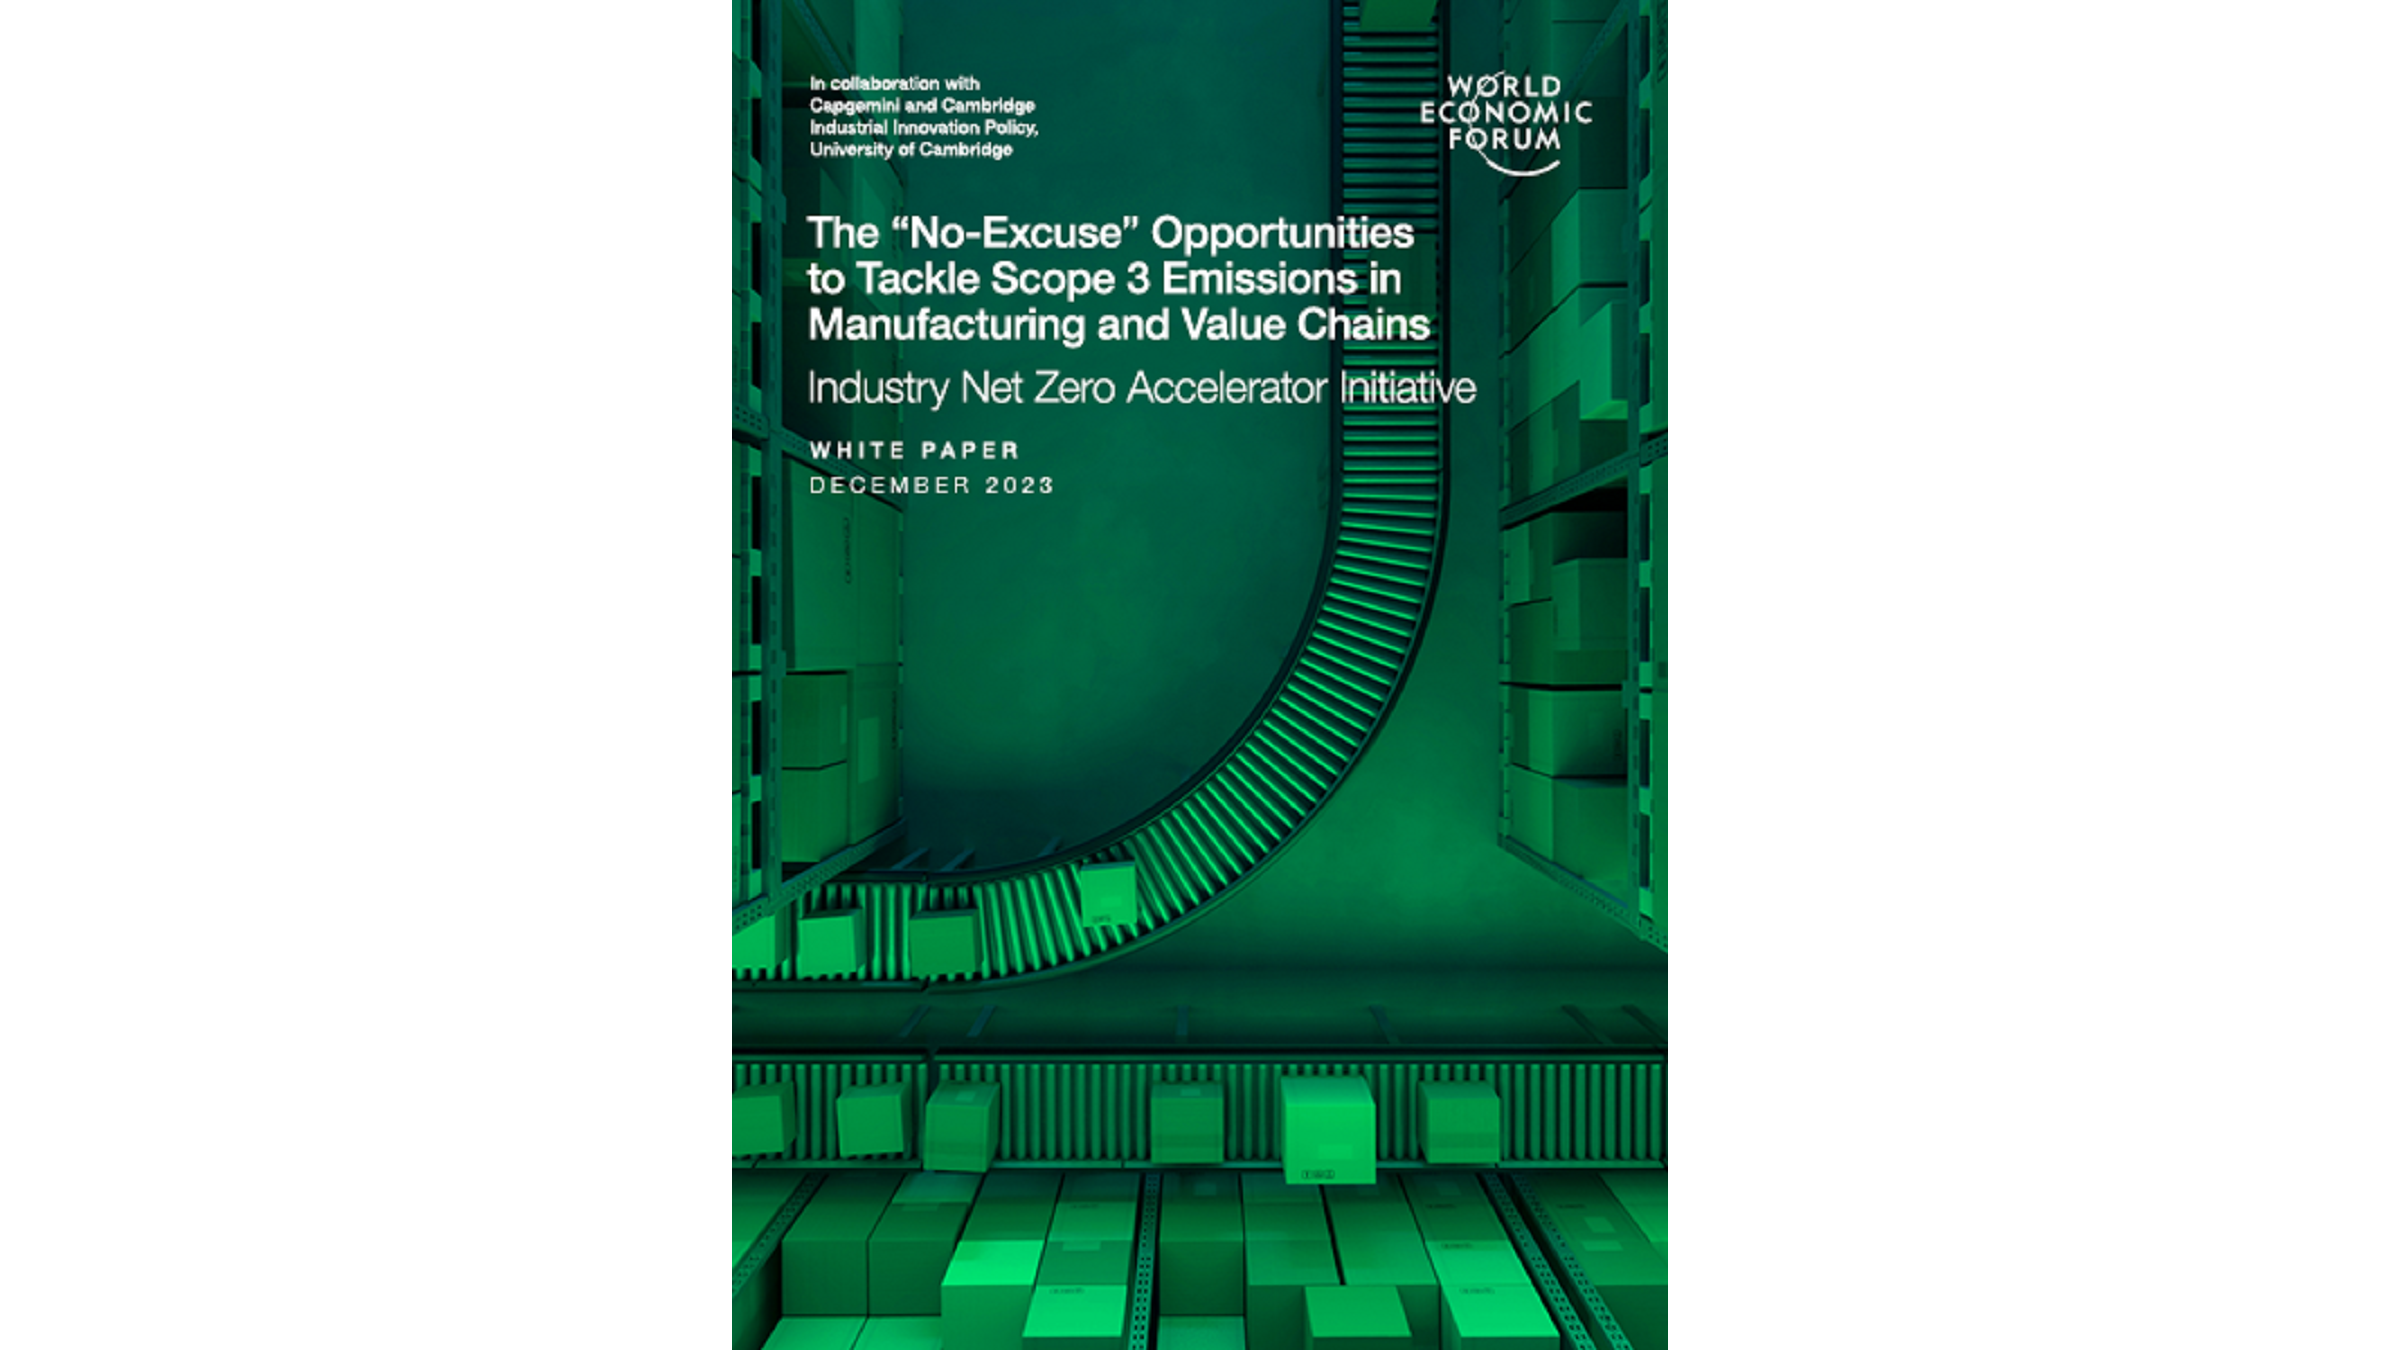 World Economic Forum Whitepaper - The 'No-Excuse' Opportunities to Tackle Scope 3 Emissions in Manufacturing and Value Chains